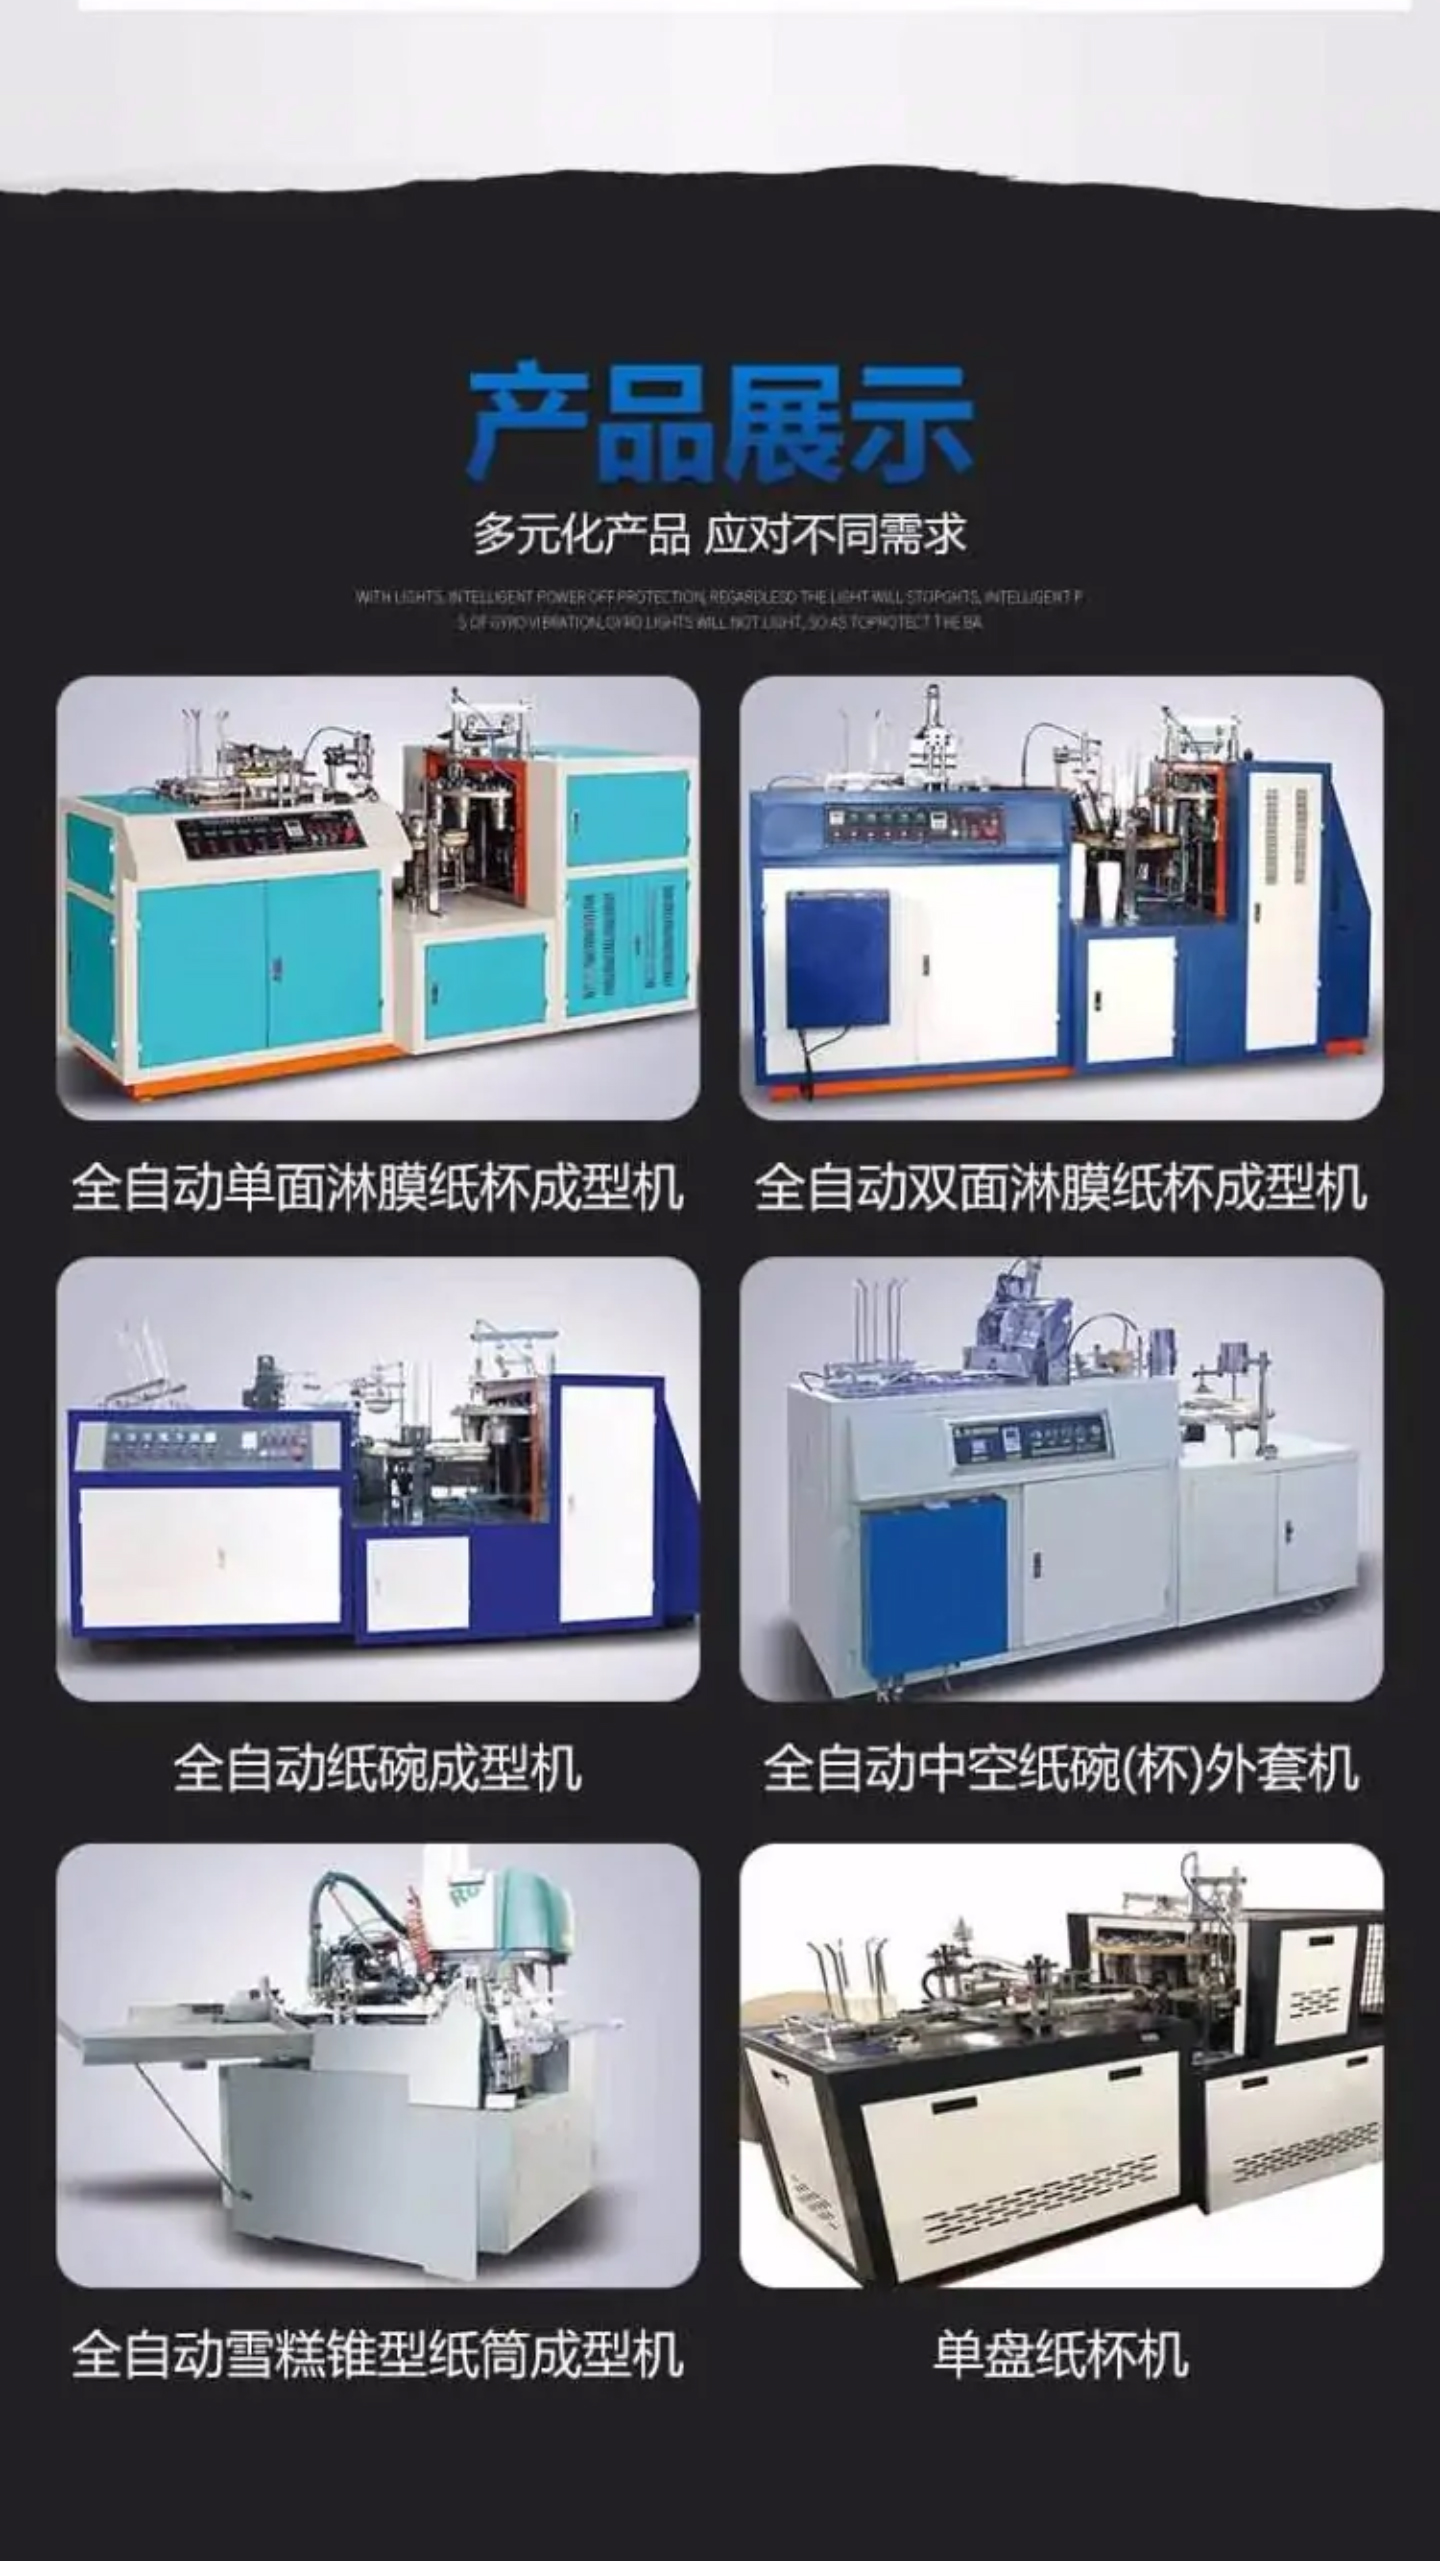 Fully automatic disposable paper bowl machine, takeout packaging, lunch box forming machine, aluminum foil coating paper bowl machine